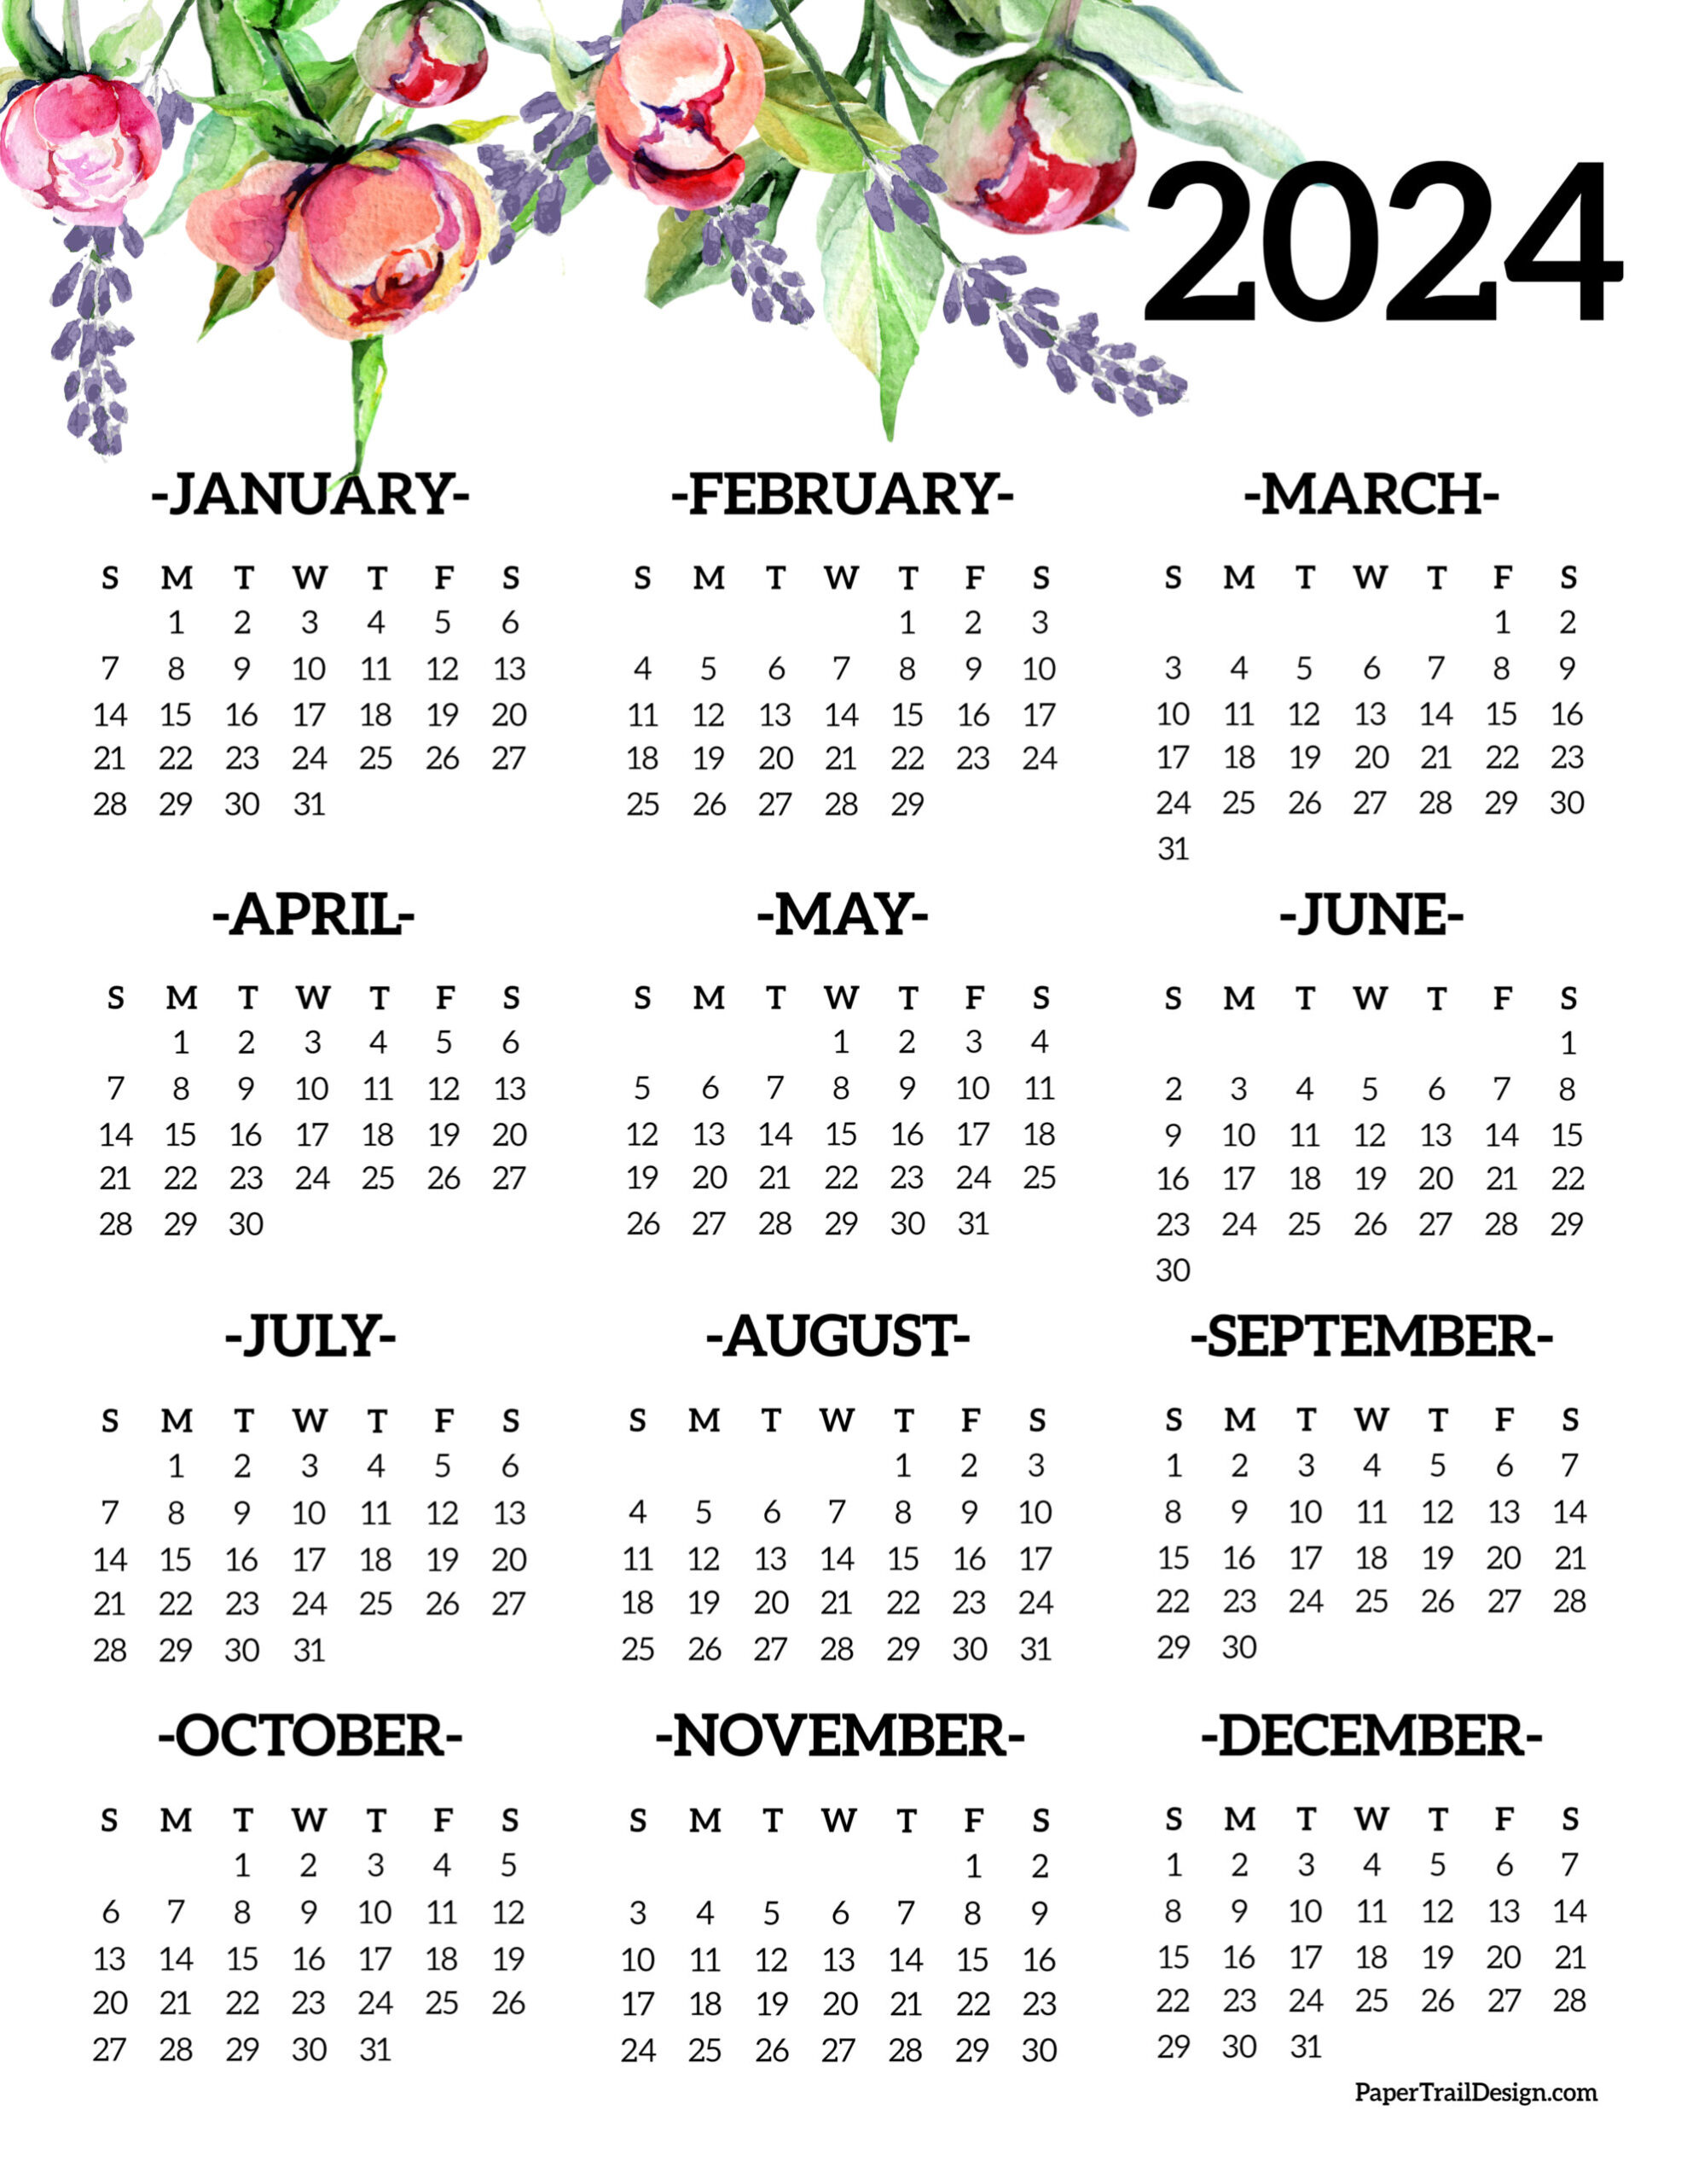 Calendar 2024 Printable One Page - Paper Trail Design for 2024 Printable One Page Calendar